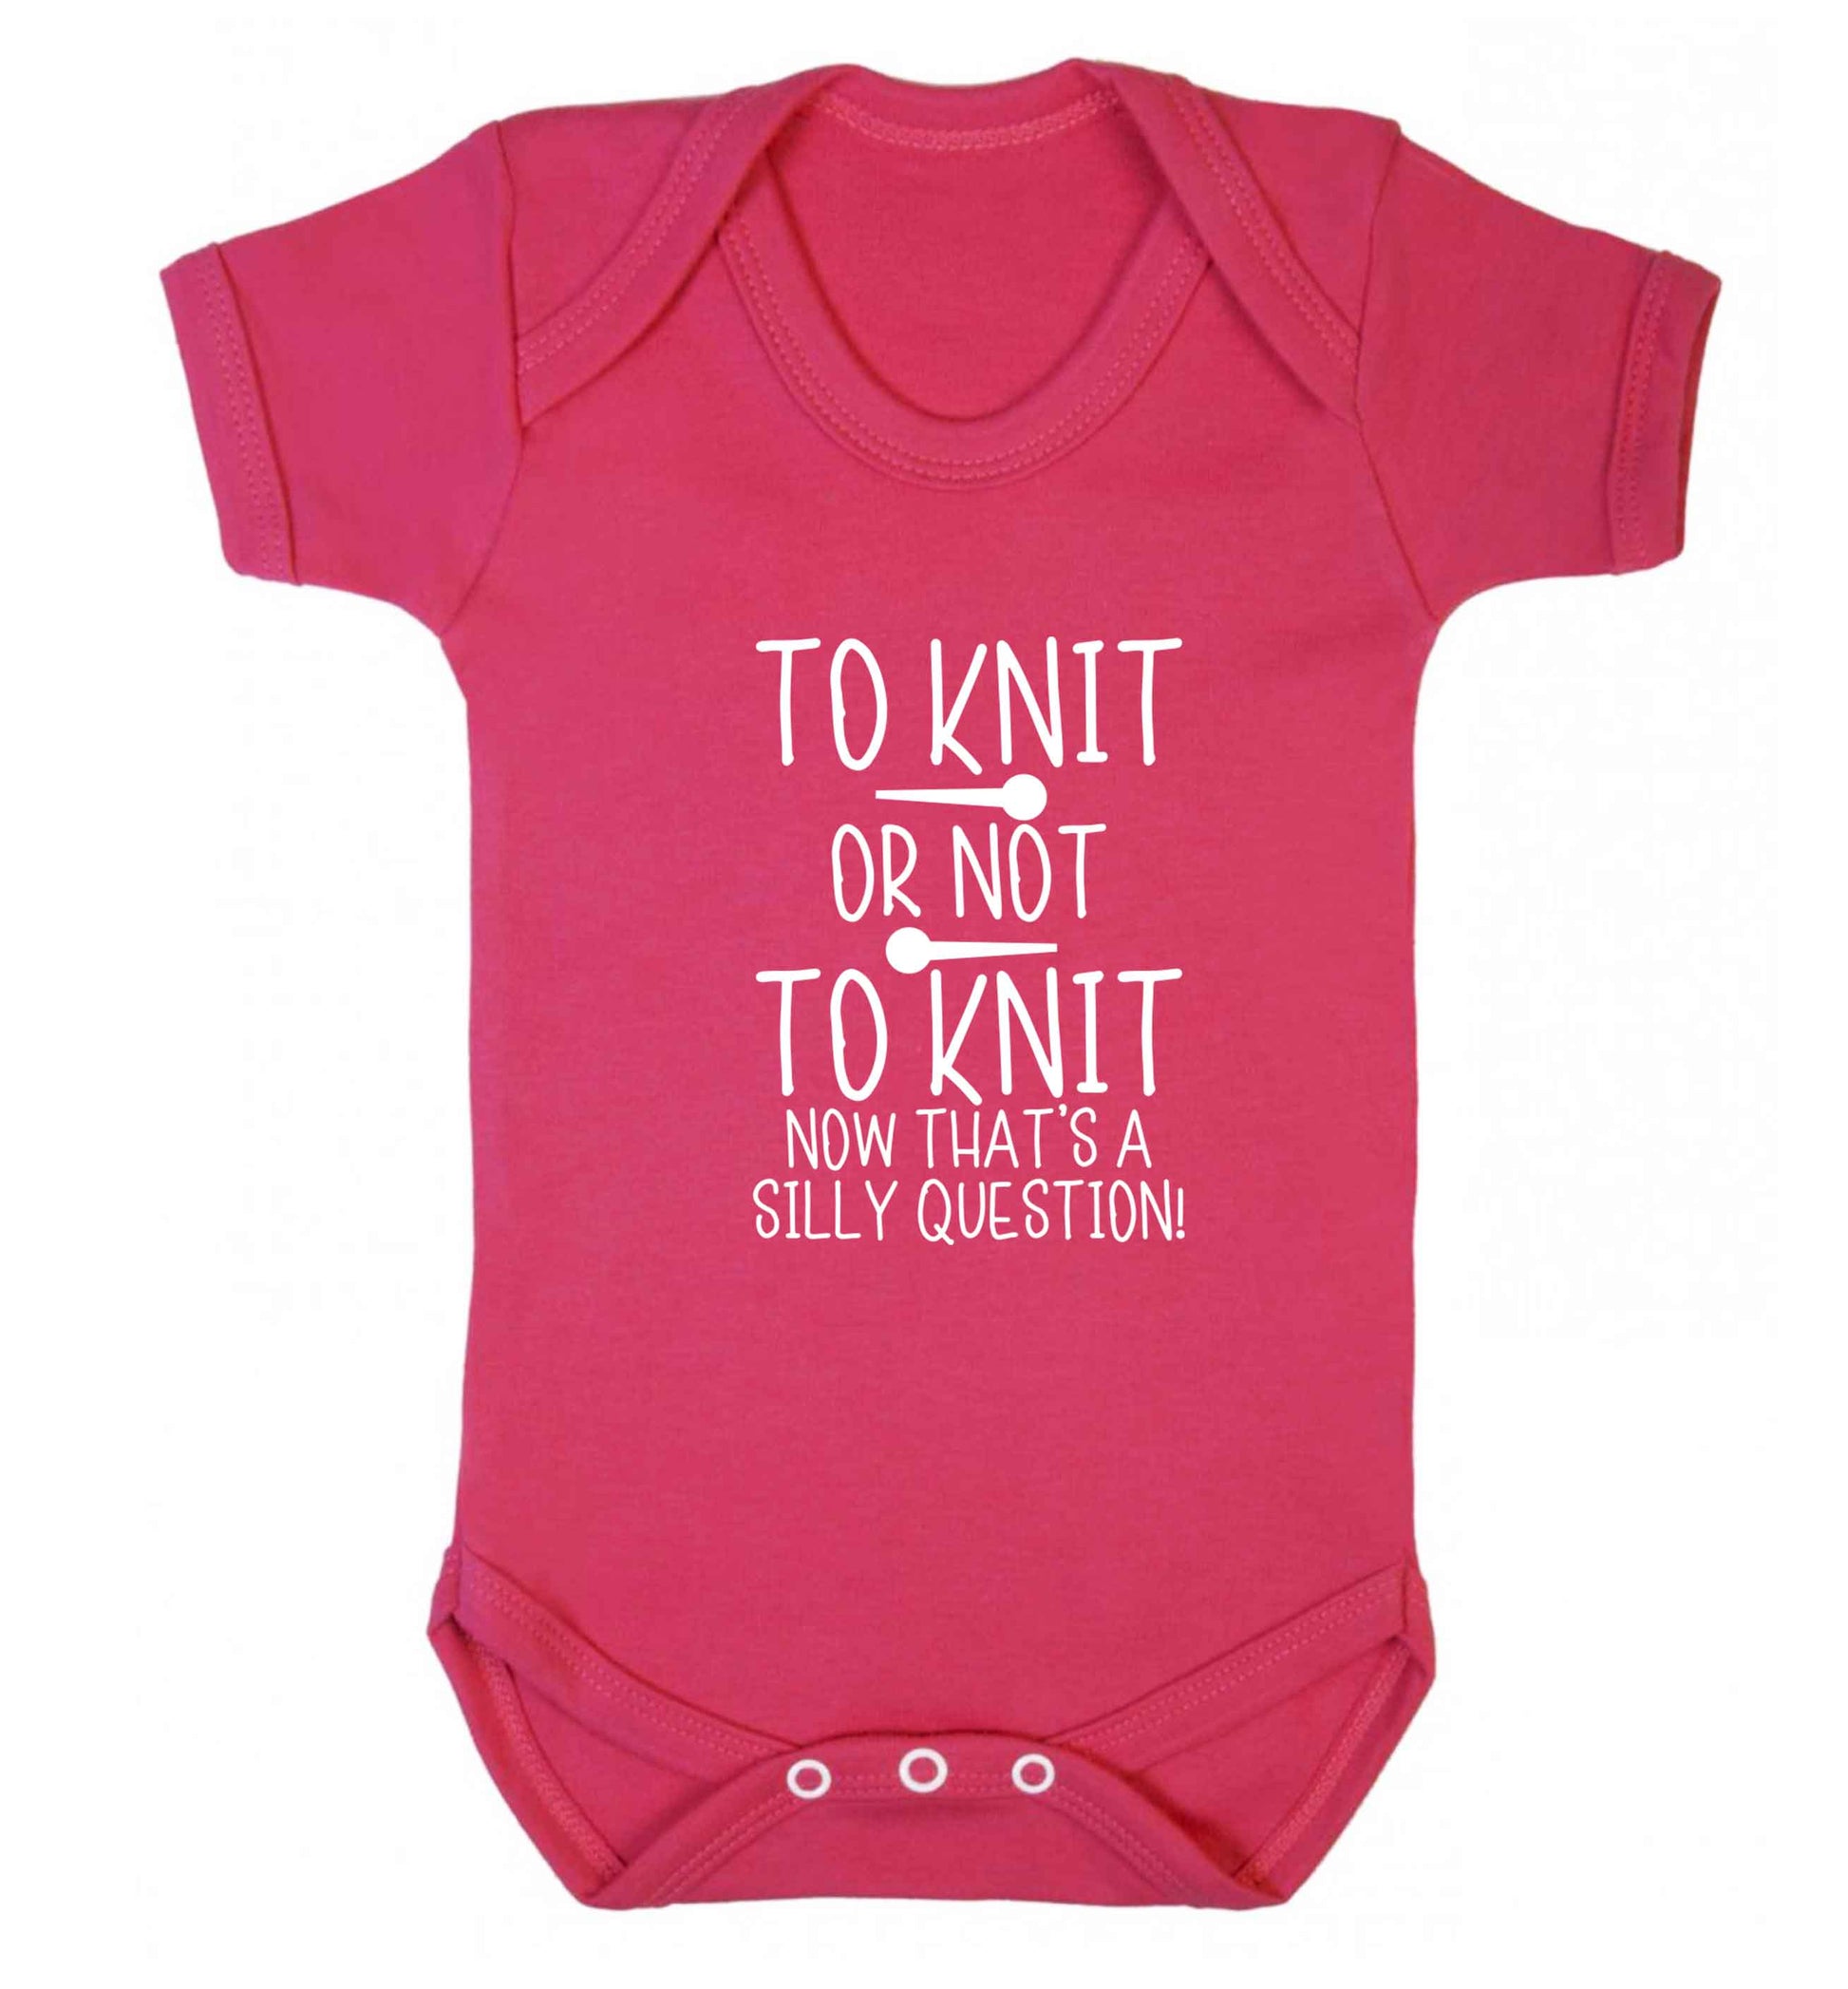 To knit or not to knit now that's a silly question baby vest dark pink 18-24 months